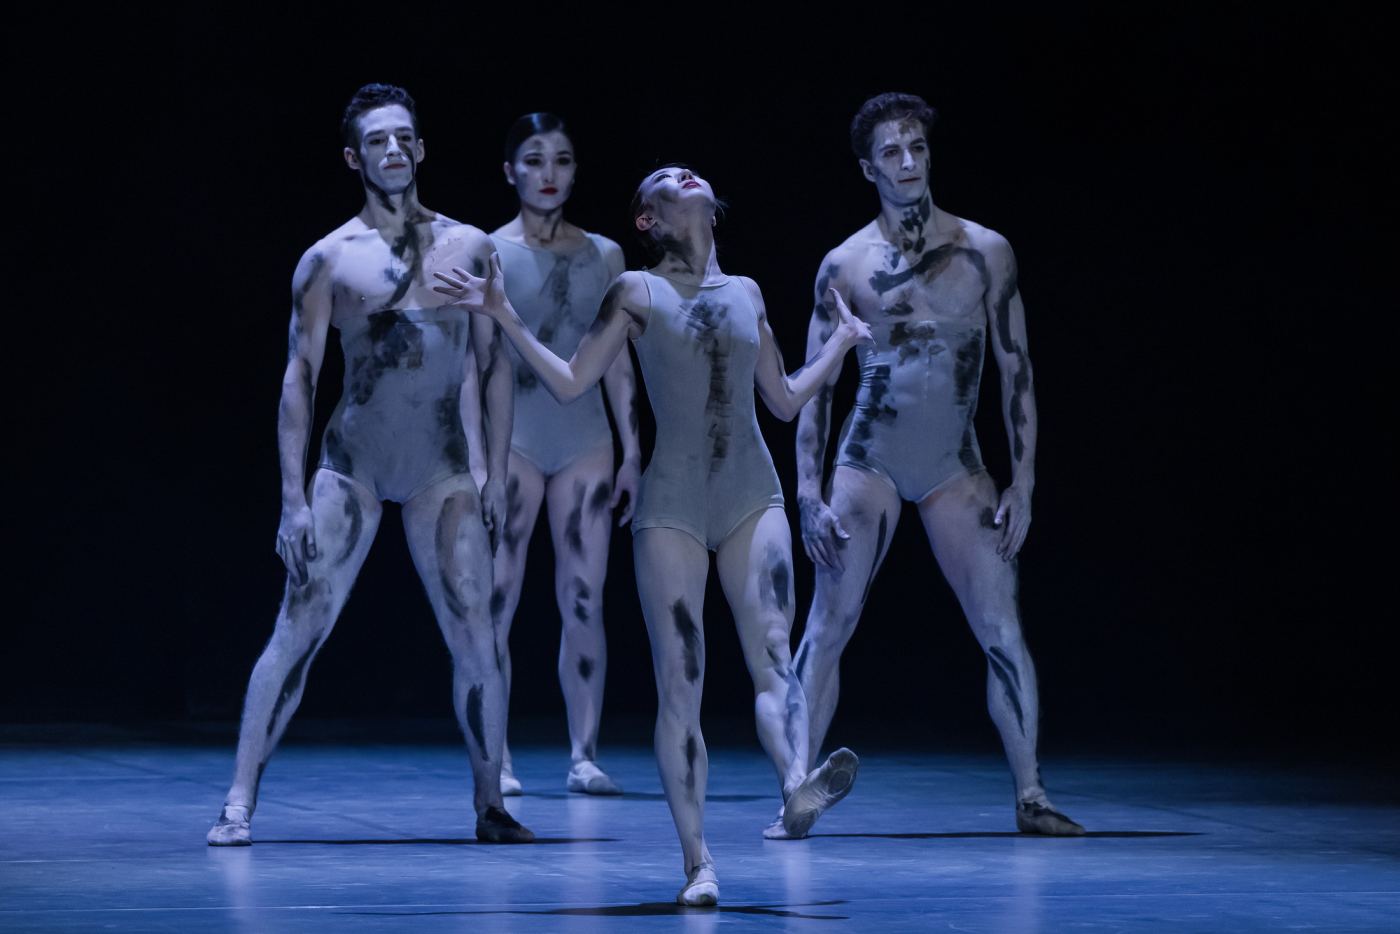 8. V.Palumbo, I.Furuhashi-Huber, Y.Lee, and S.Francesco, “Sad Case” by S.León and P.Lightfoot, Ballet of the Hungarian State Opera 2022 © A.Nagy / Hungarian State Opera 